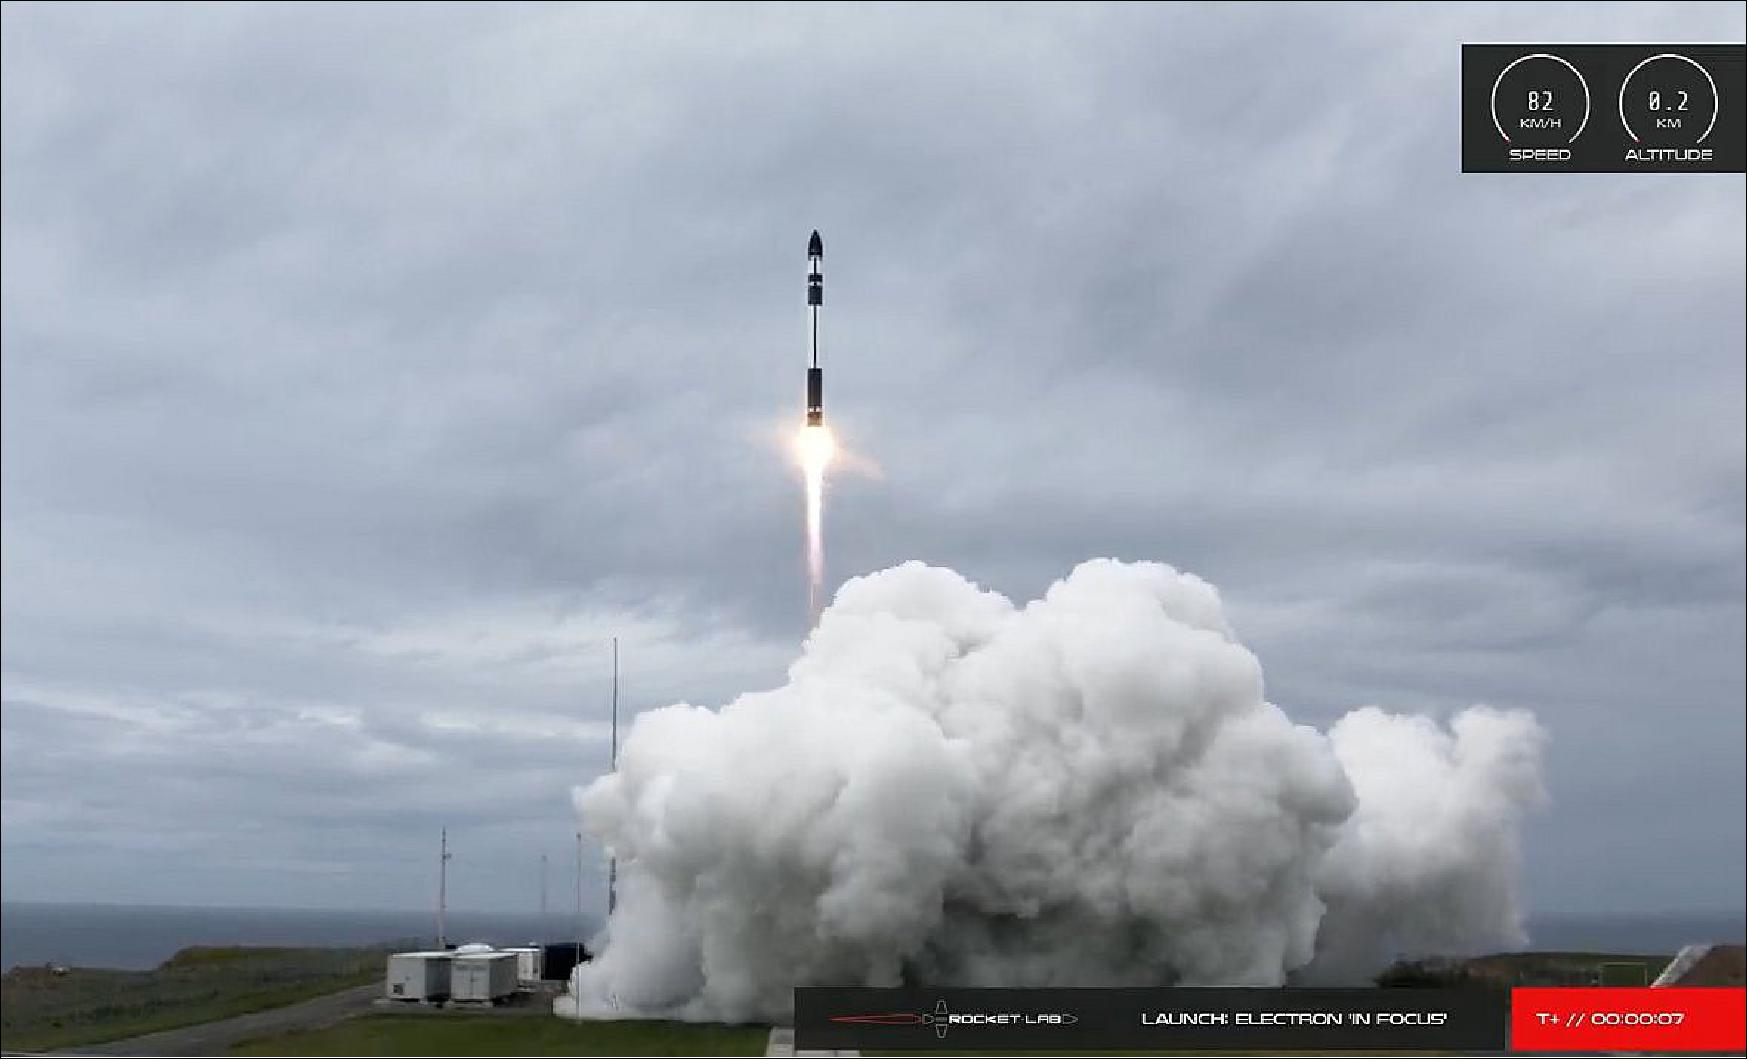 Figure 13: Liftoff of Rocket Lab’s Electron rocket carrying Planet's nine SuperDoves (3U CubeSats) and an experimental microsatellite of Canon Electronics (image credit: Rocket Lab)